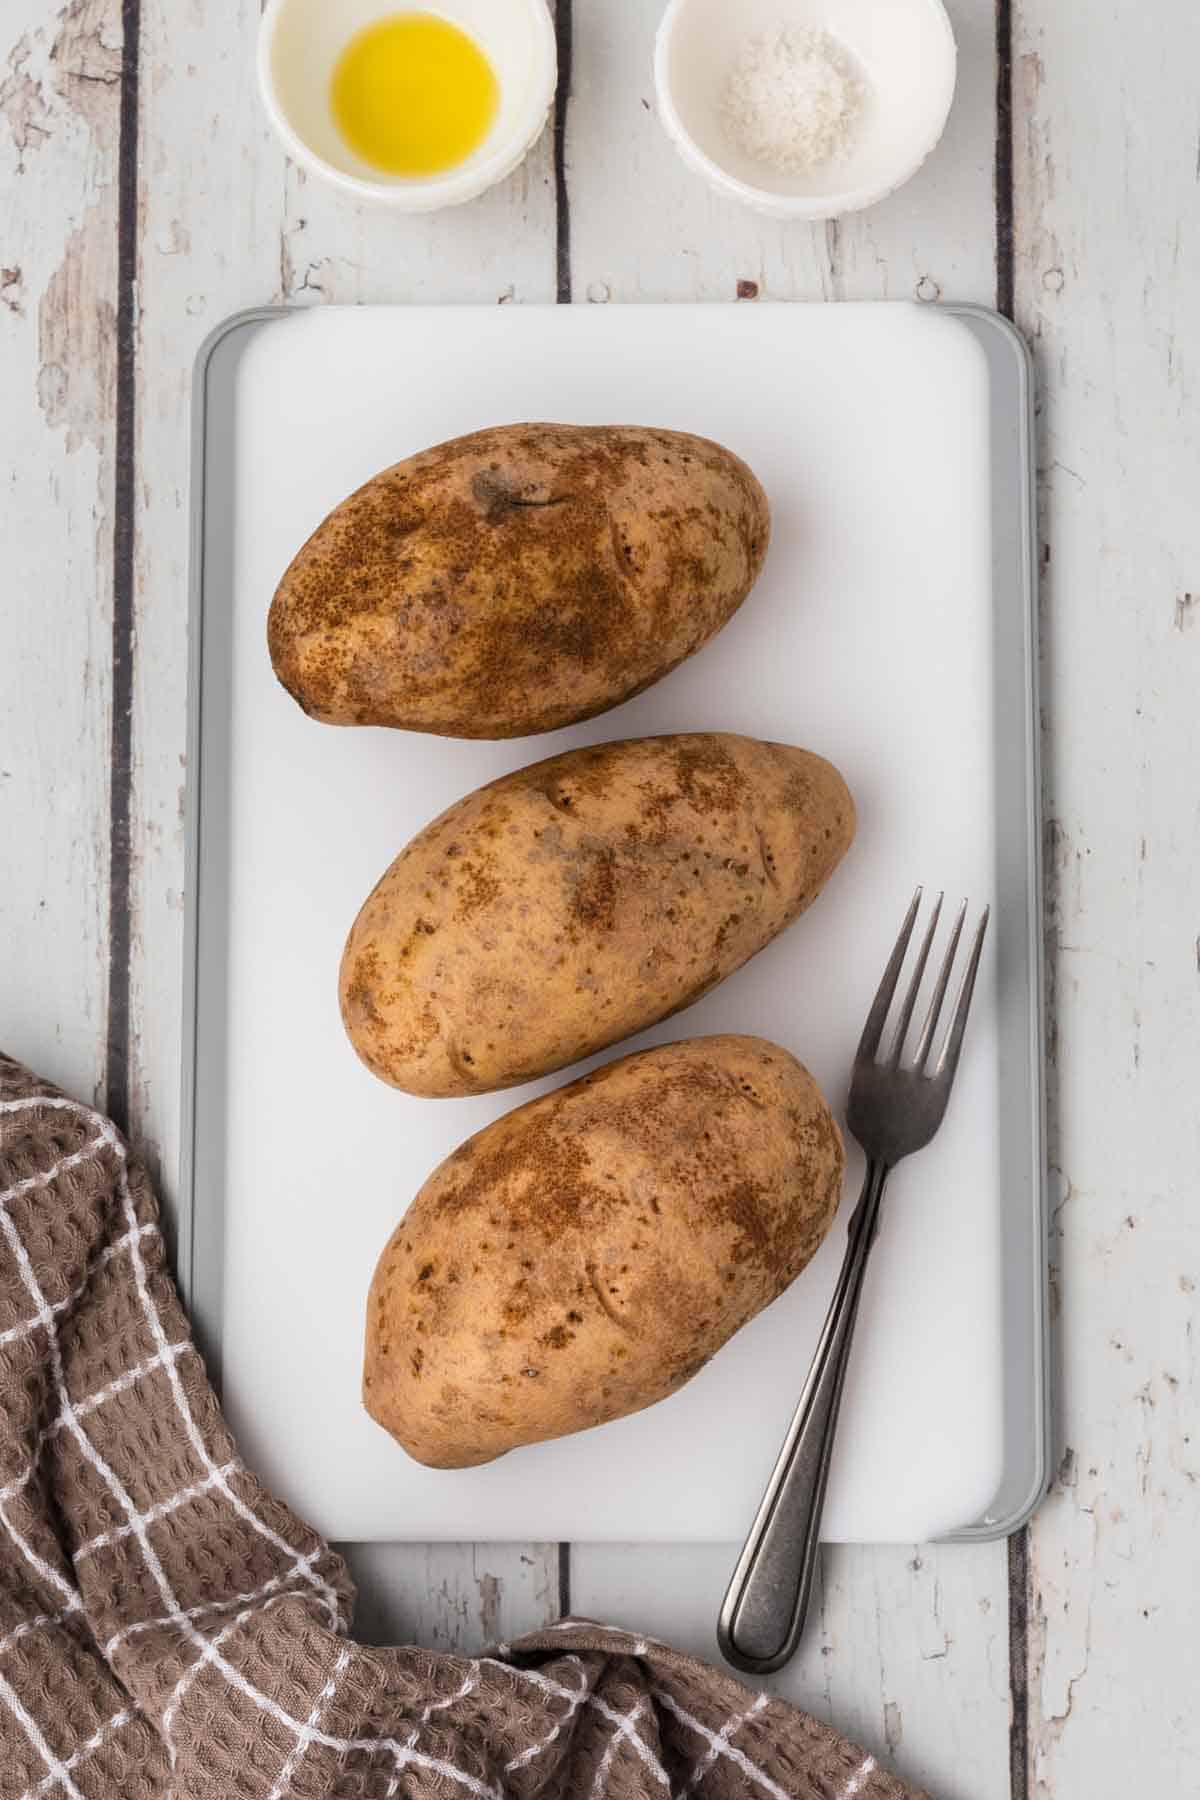 Three unpeeled potatoes are placed on a white cutting board with a fork beside them, ready for their turn as air fryer baked potatoes. Next to the cutting board is a small cup of oil, a small bowl of salt, and a brown checkered cloth. The scene is set on a rustic white wooden surface.